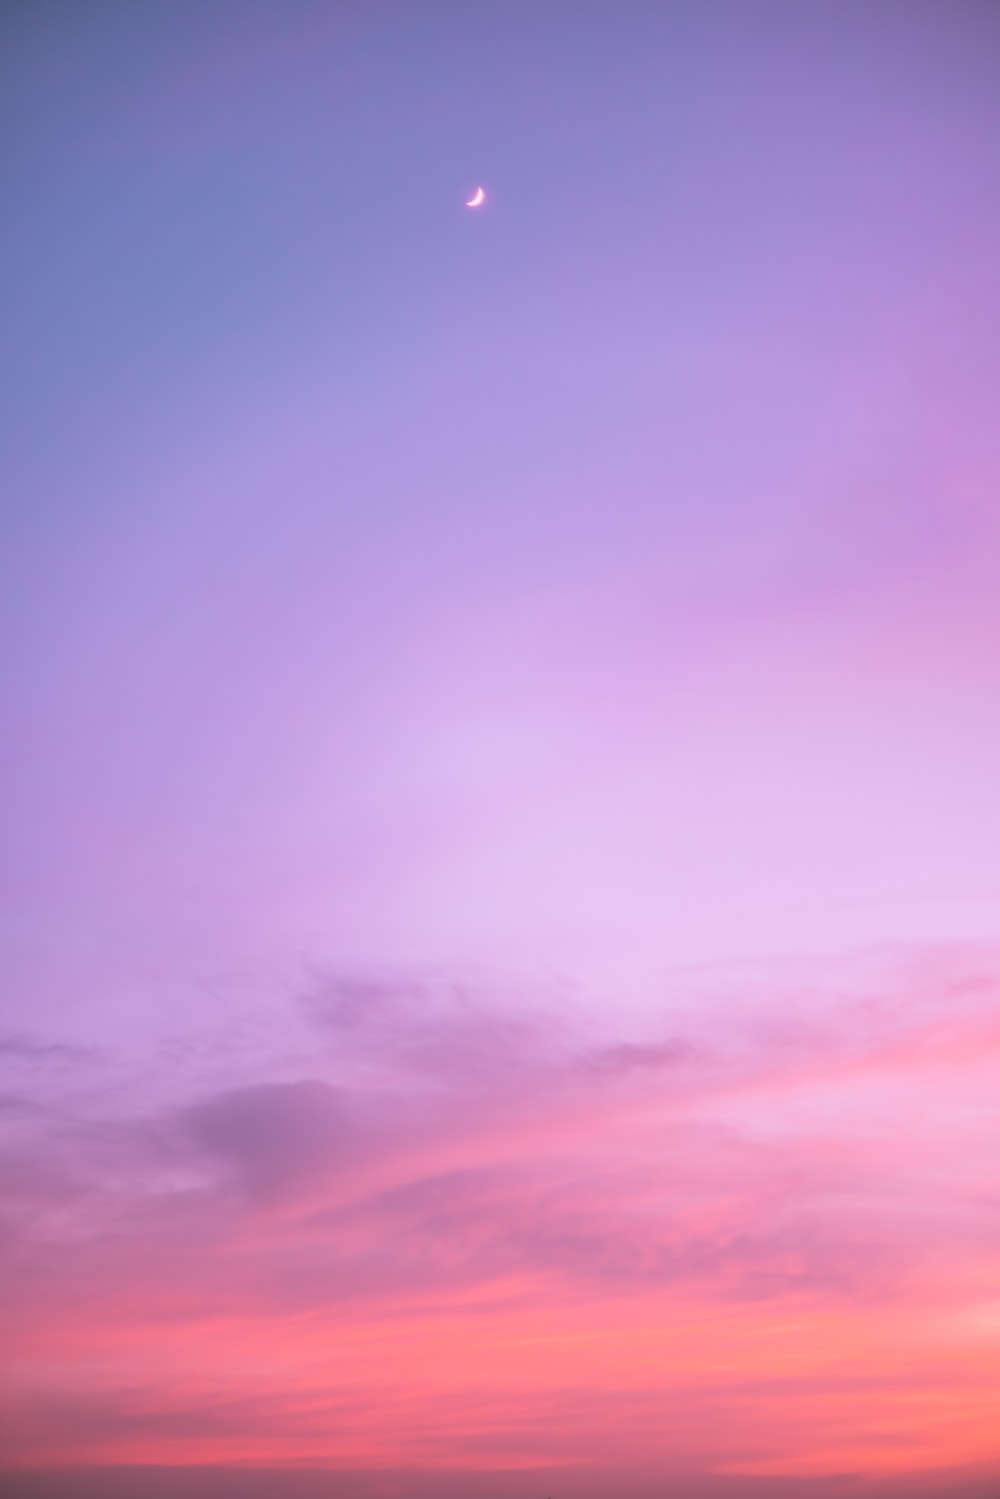 Pink Sky Sunset Wallpapers